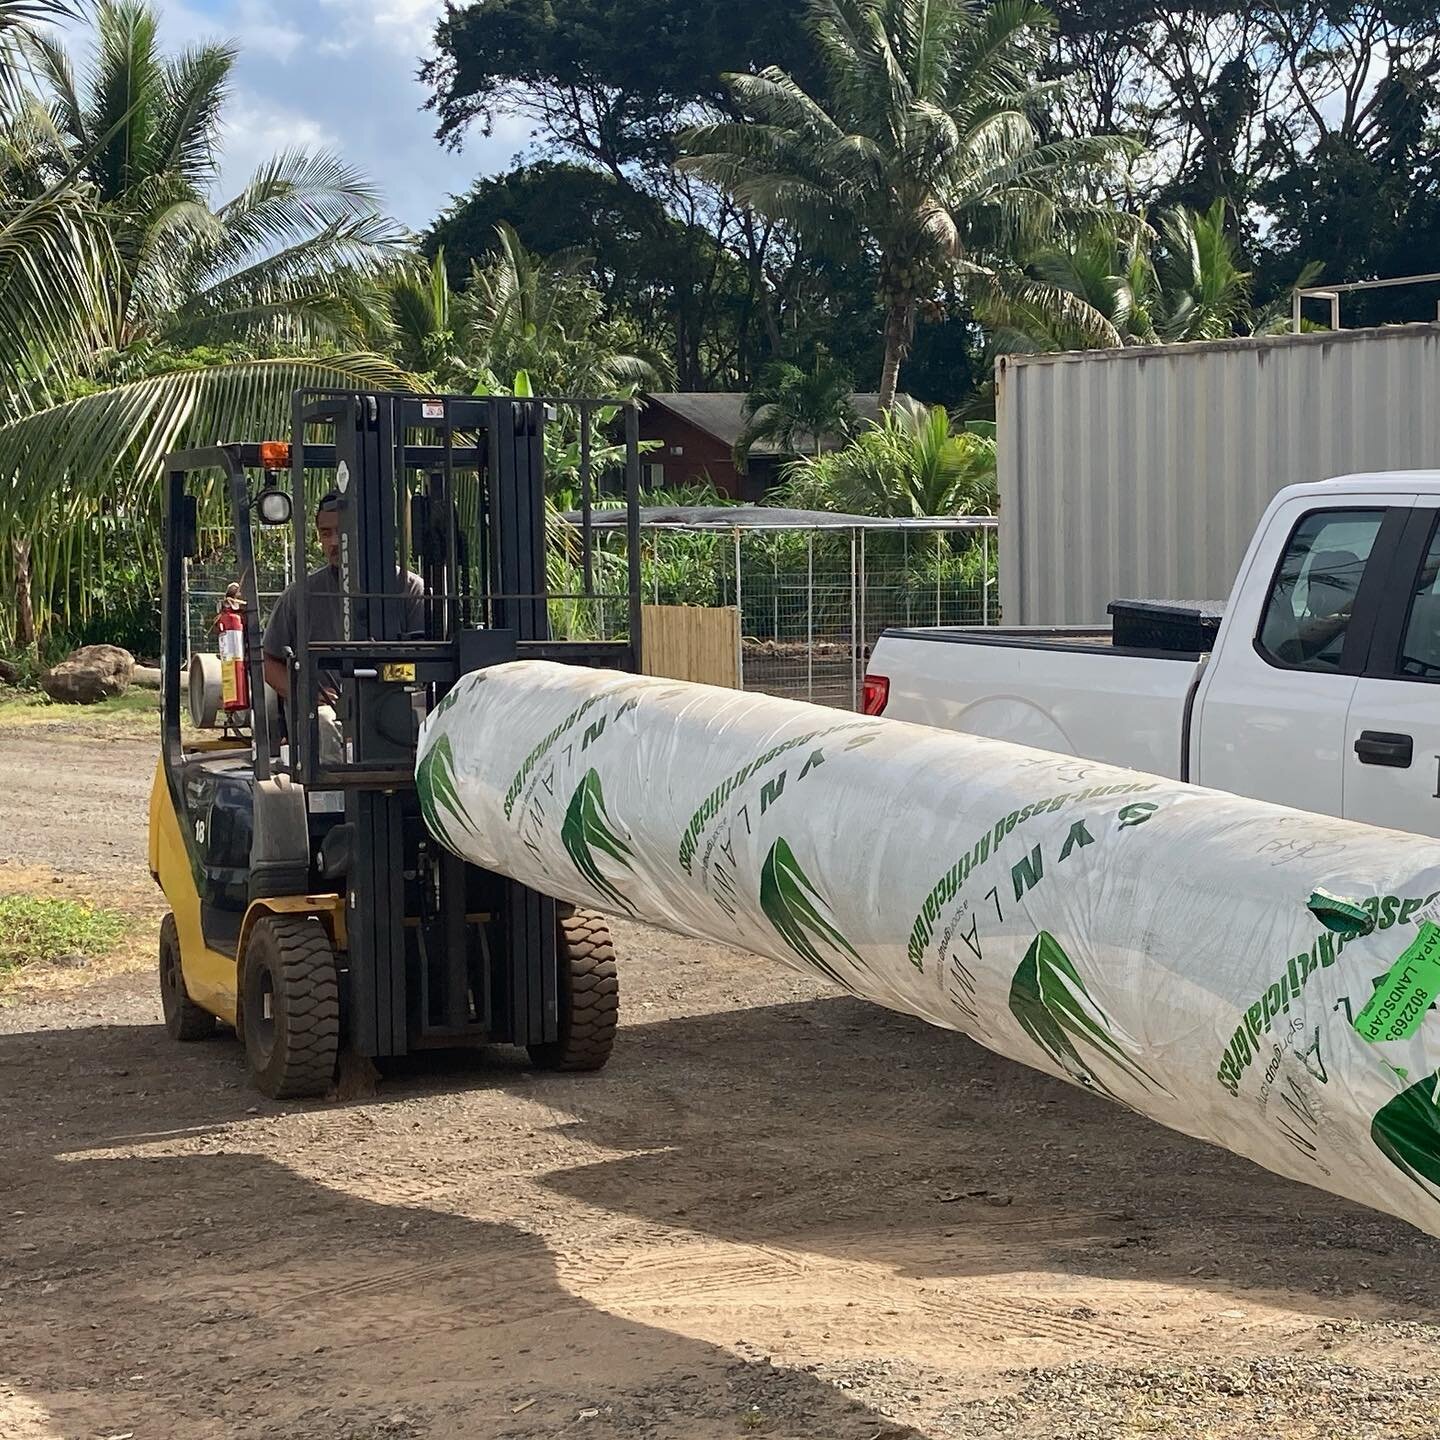 We&rsquo;re on the move this morning, if you want your lawn maintenance/watering cost to go away - call and let us show what we can do 💵 #5931864 #SYNlawnOahu#hawaiilandscaping #SyntheticTurf #ArtificialGrass #Turf #Grass #SynLawn #lifetimewarranty 